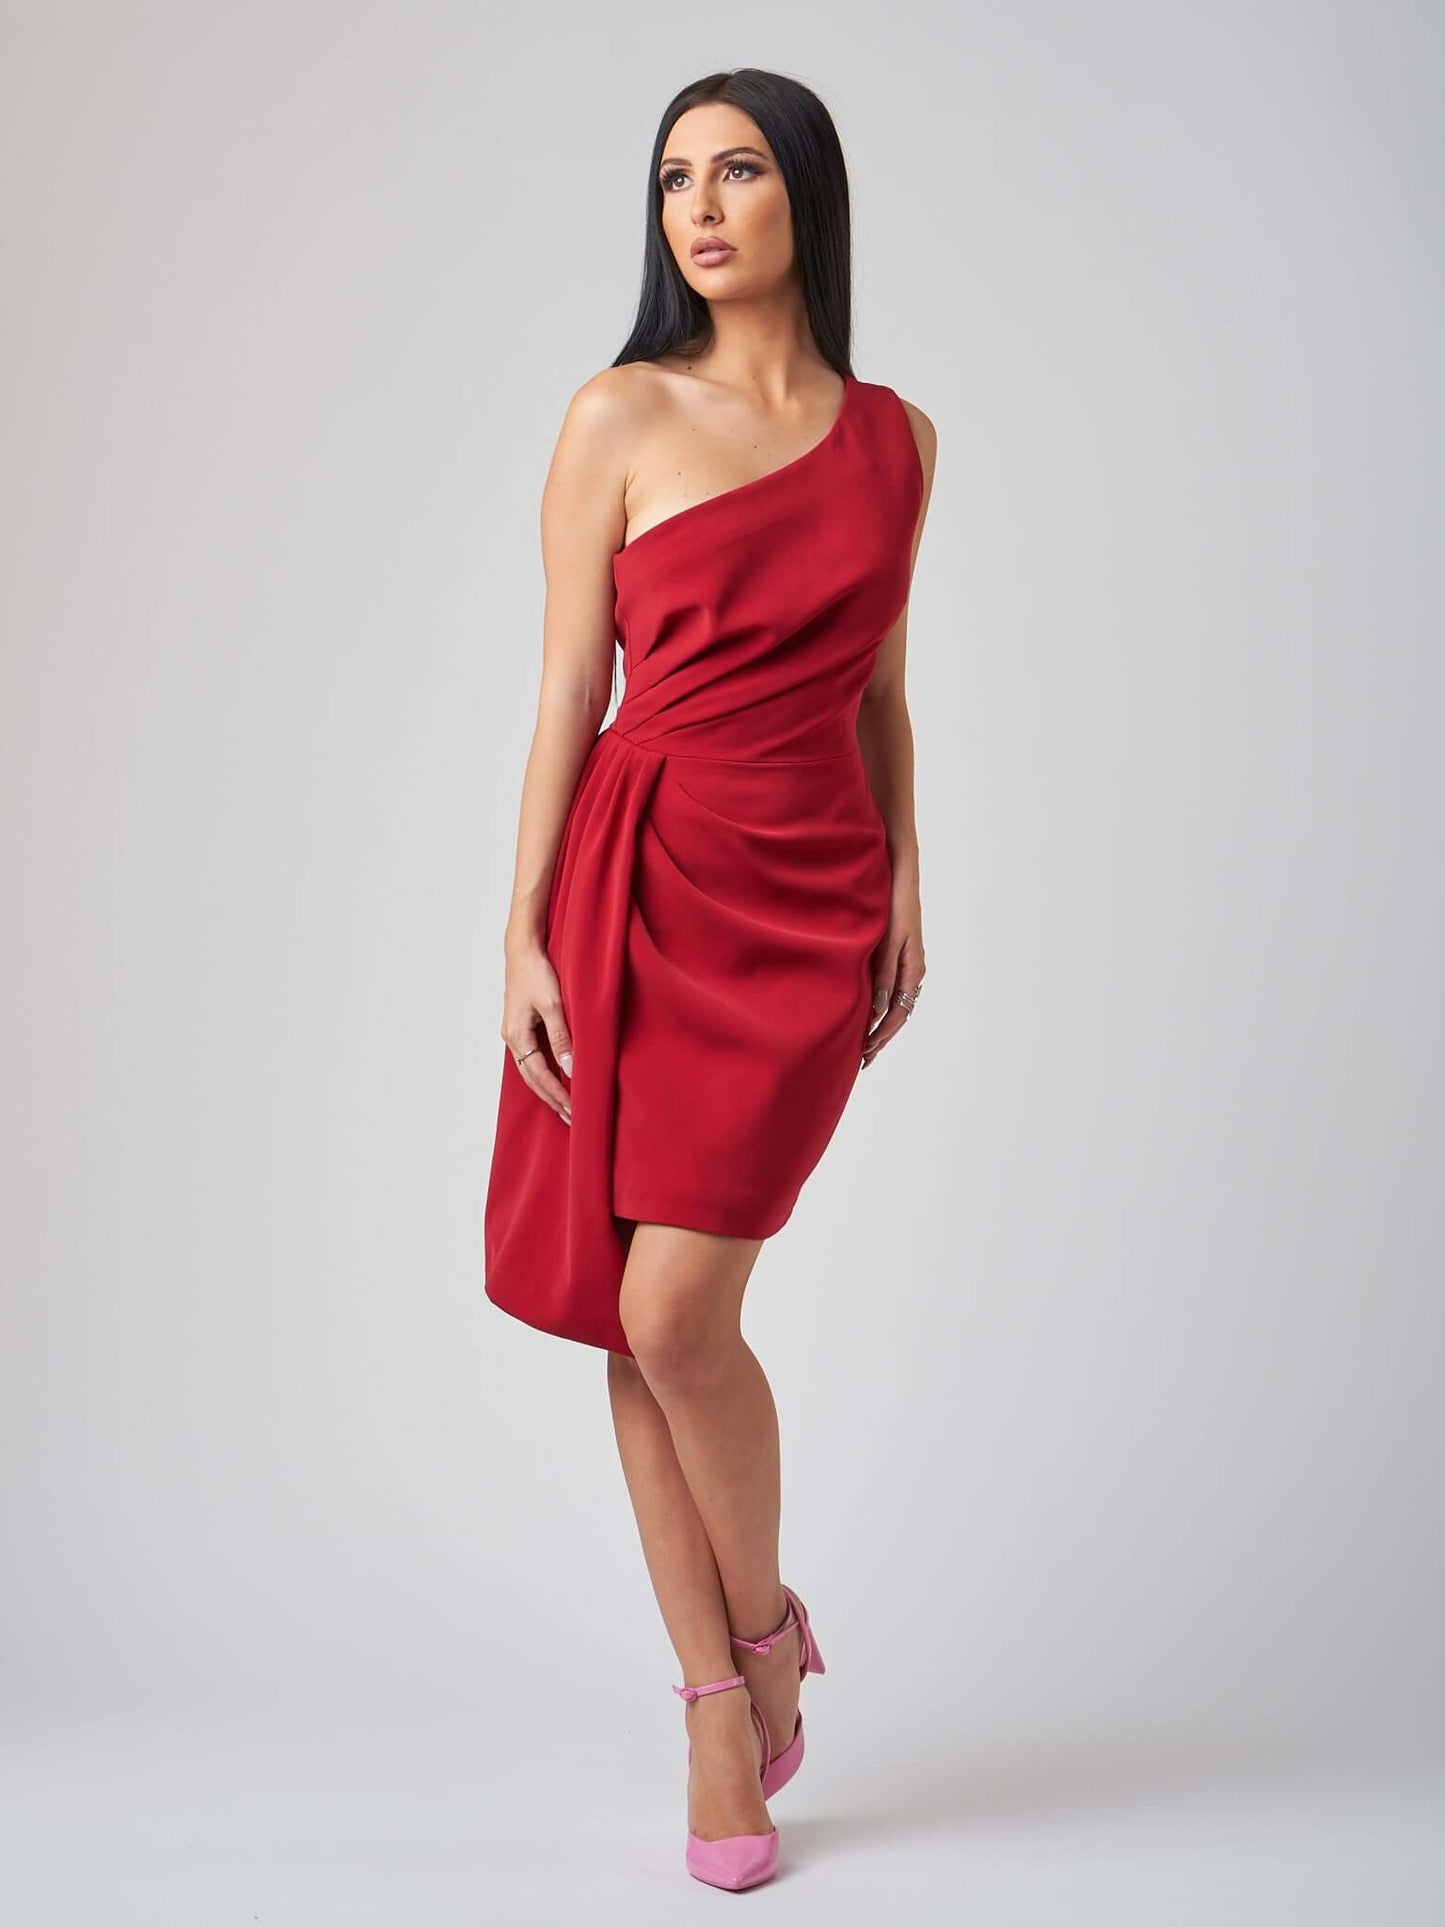 Tia Dorraine Iconic Glamour Draped Short Dress - Fierce Red Tia Dorraine’s artful creations such as this dress are made to be reserved for important moments. Crafted from stretch crepe, this dress channels old Hollywood glam through its draped core and as